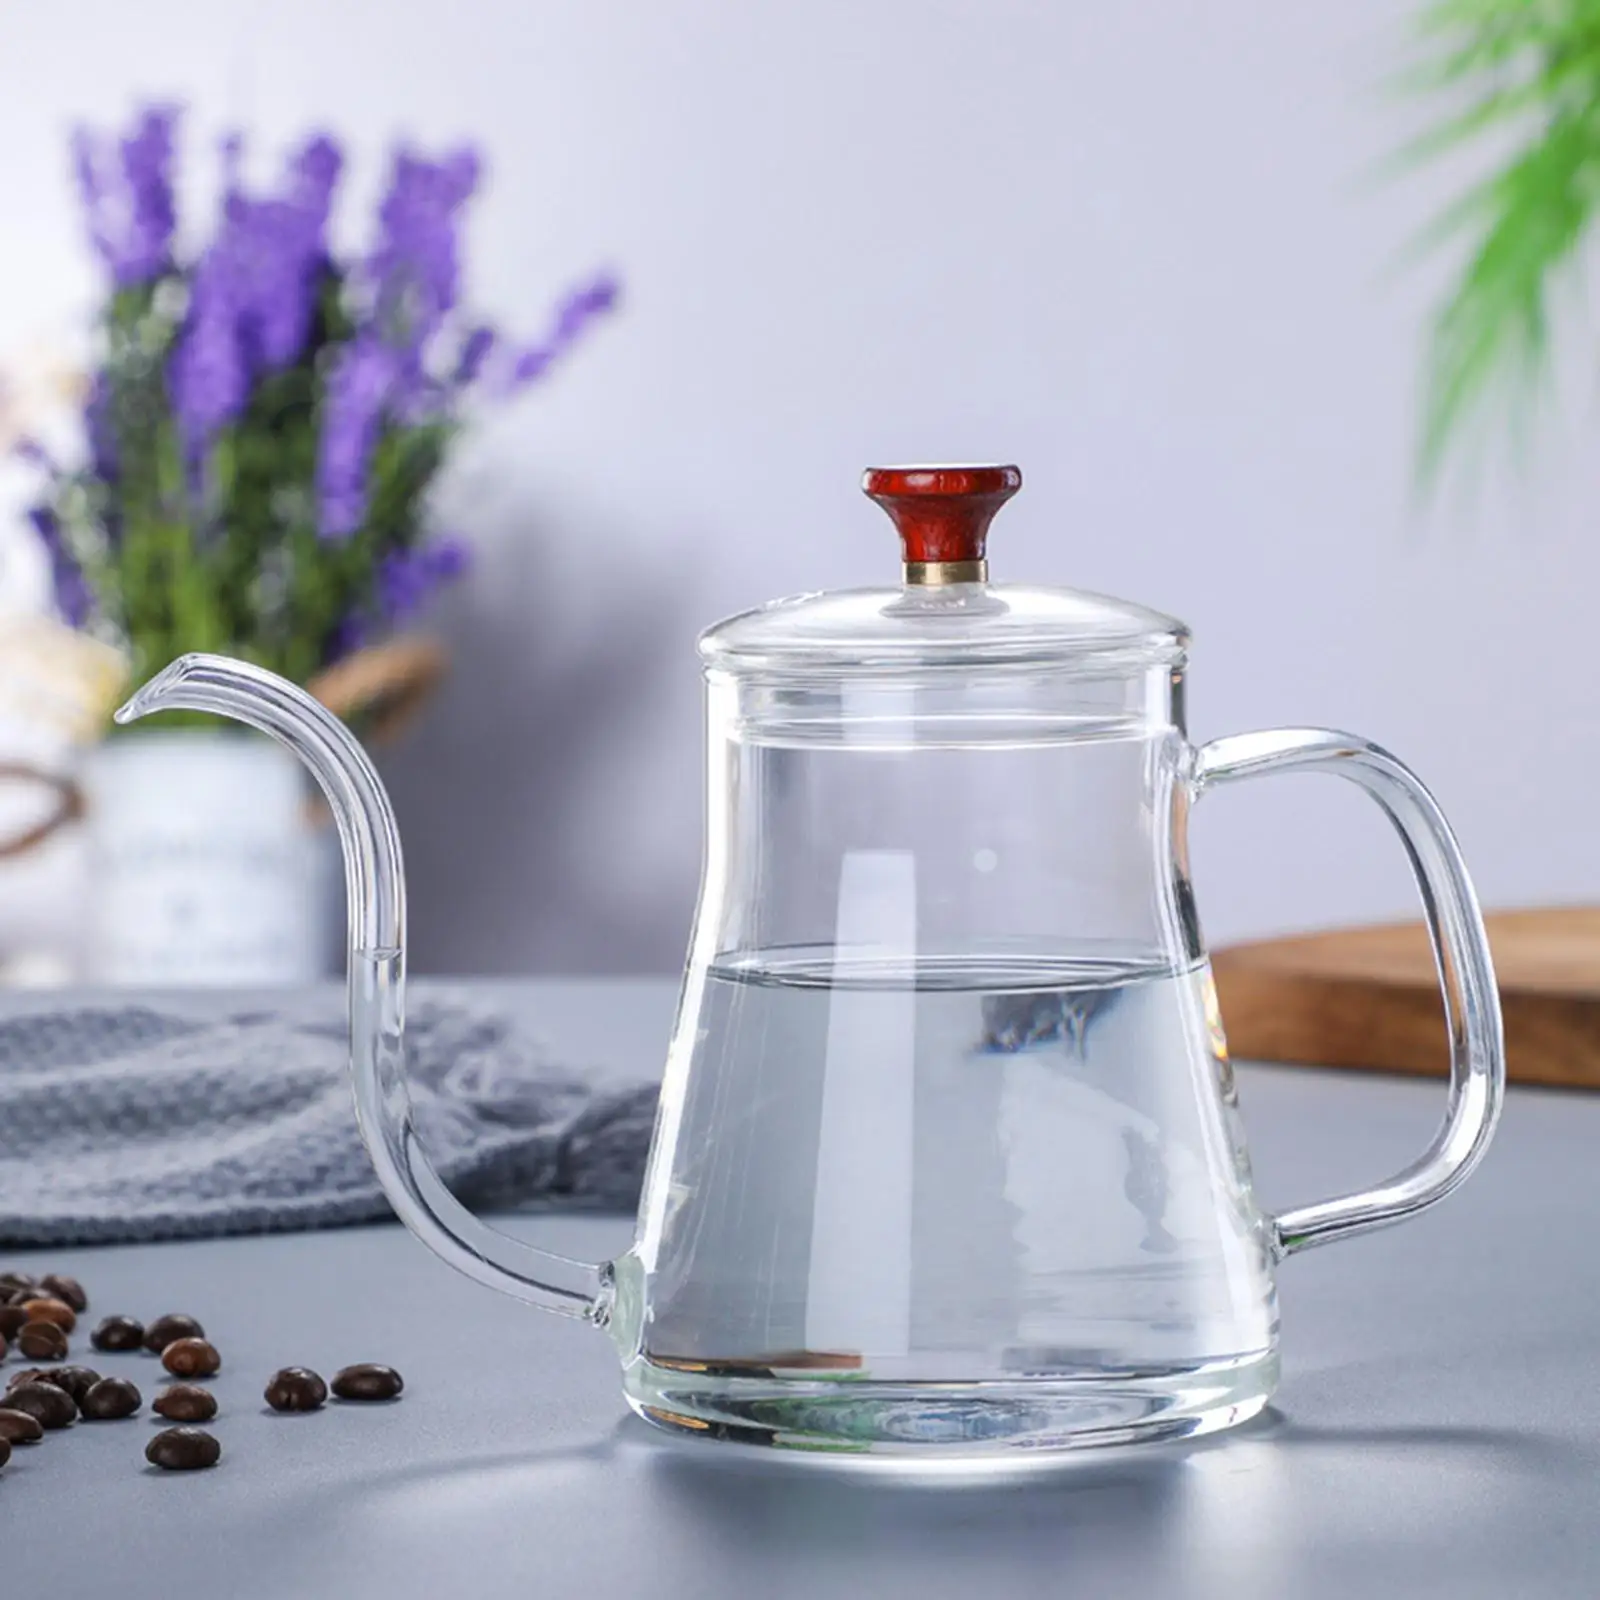 Glass Tea Pour Over Kettle with Lid for Drip Coffee Hand-Made Coffee and Tea